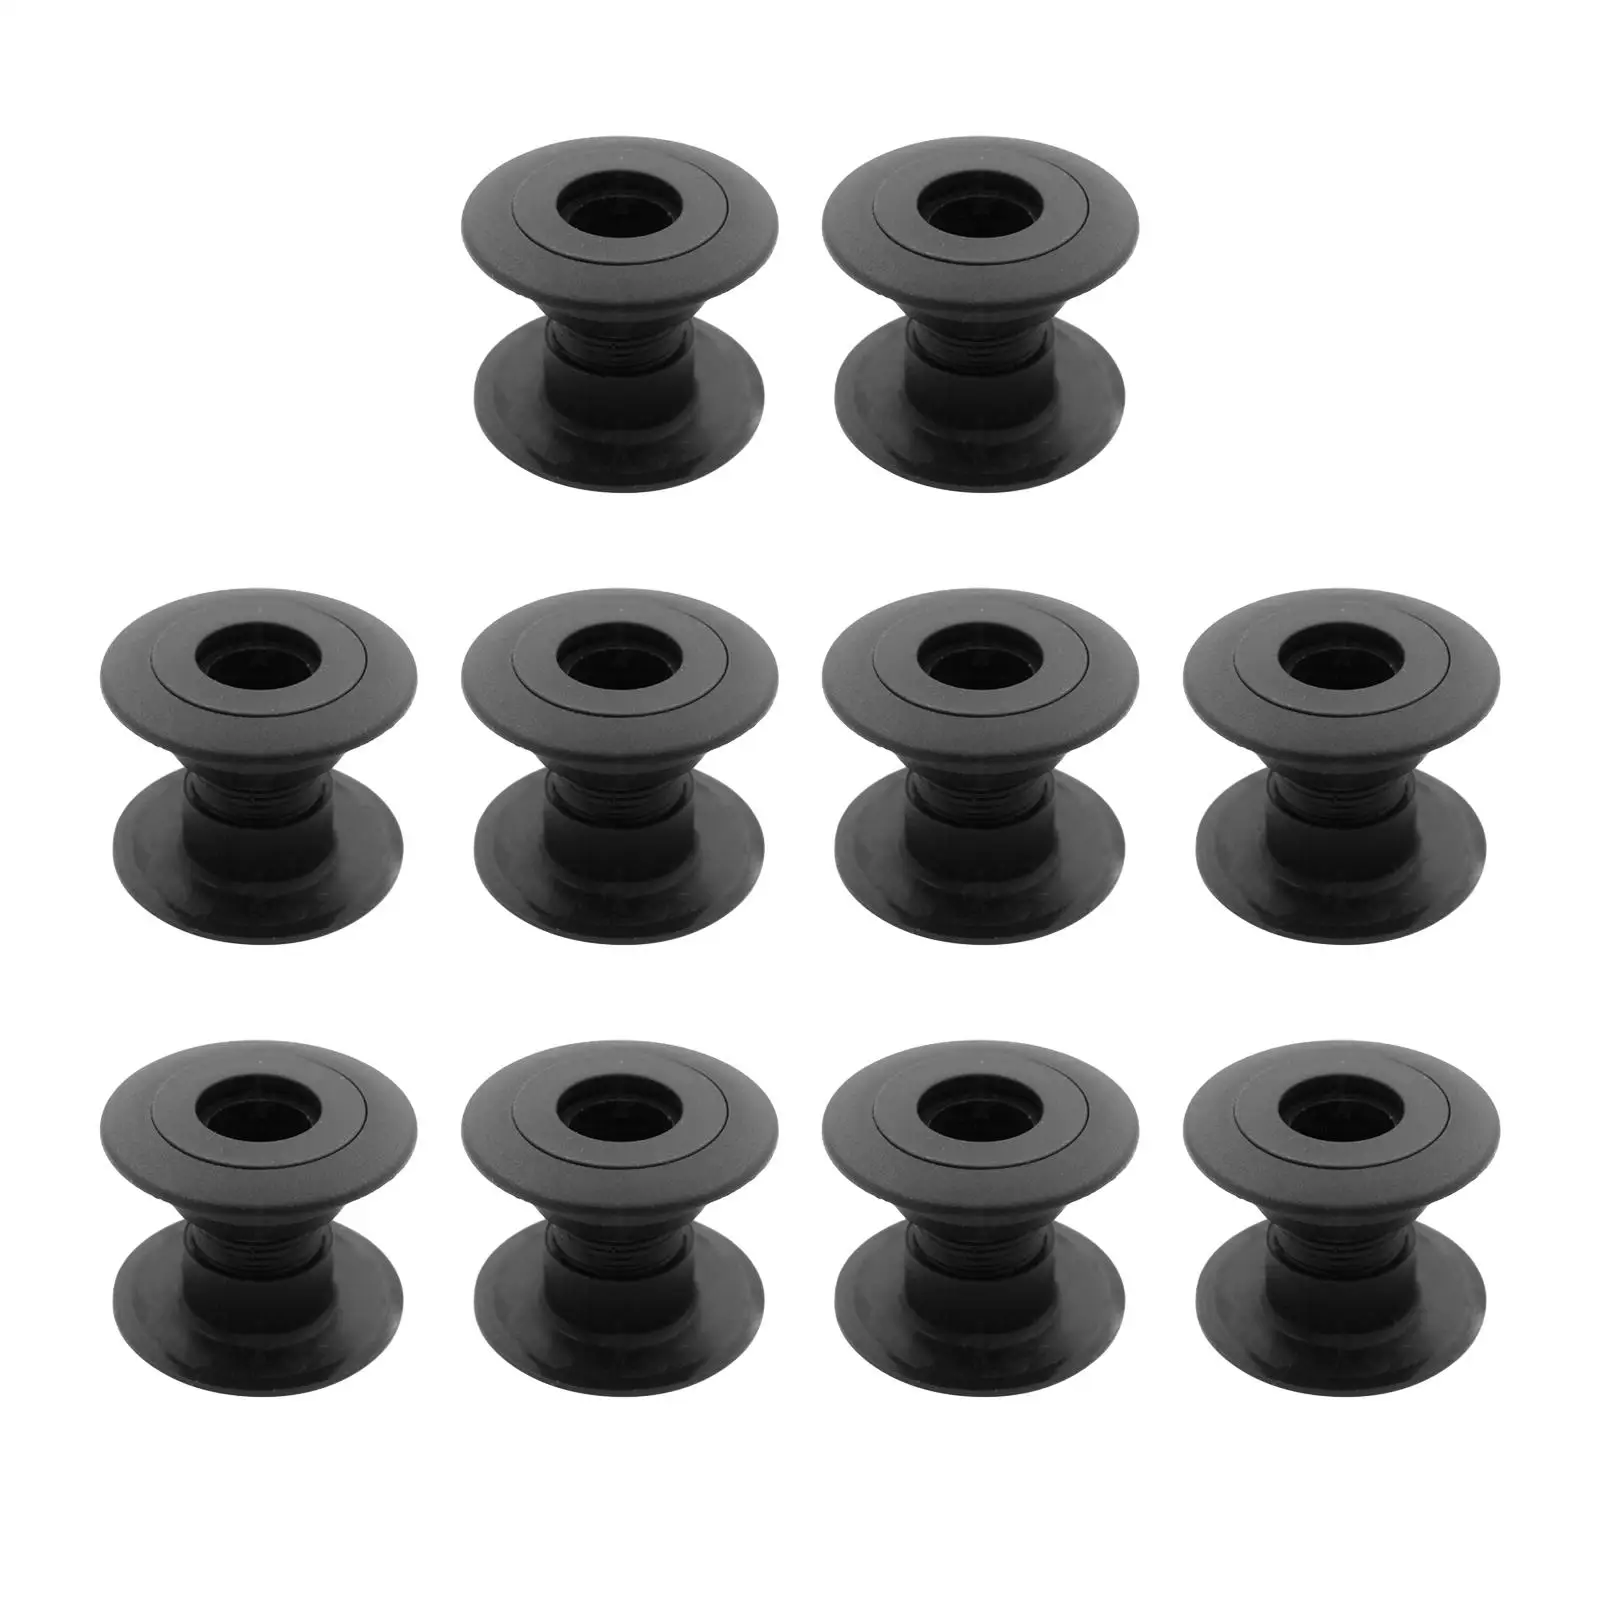 Foosball Bearing Rods Soccer Games Foosball Bushings Durable Threaded Structure for Standard Foosball Tables Replacement